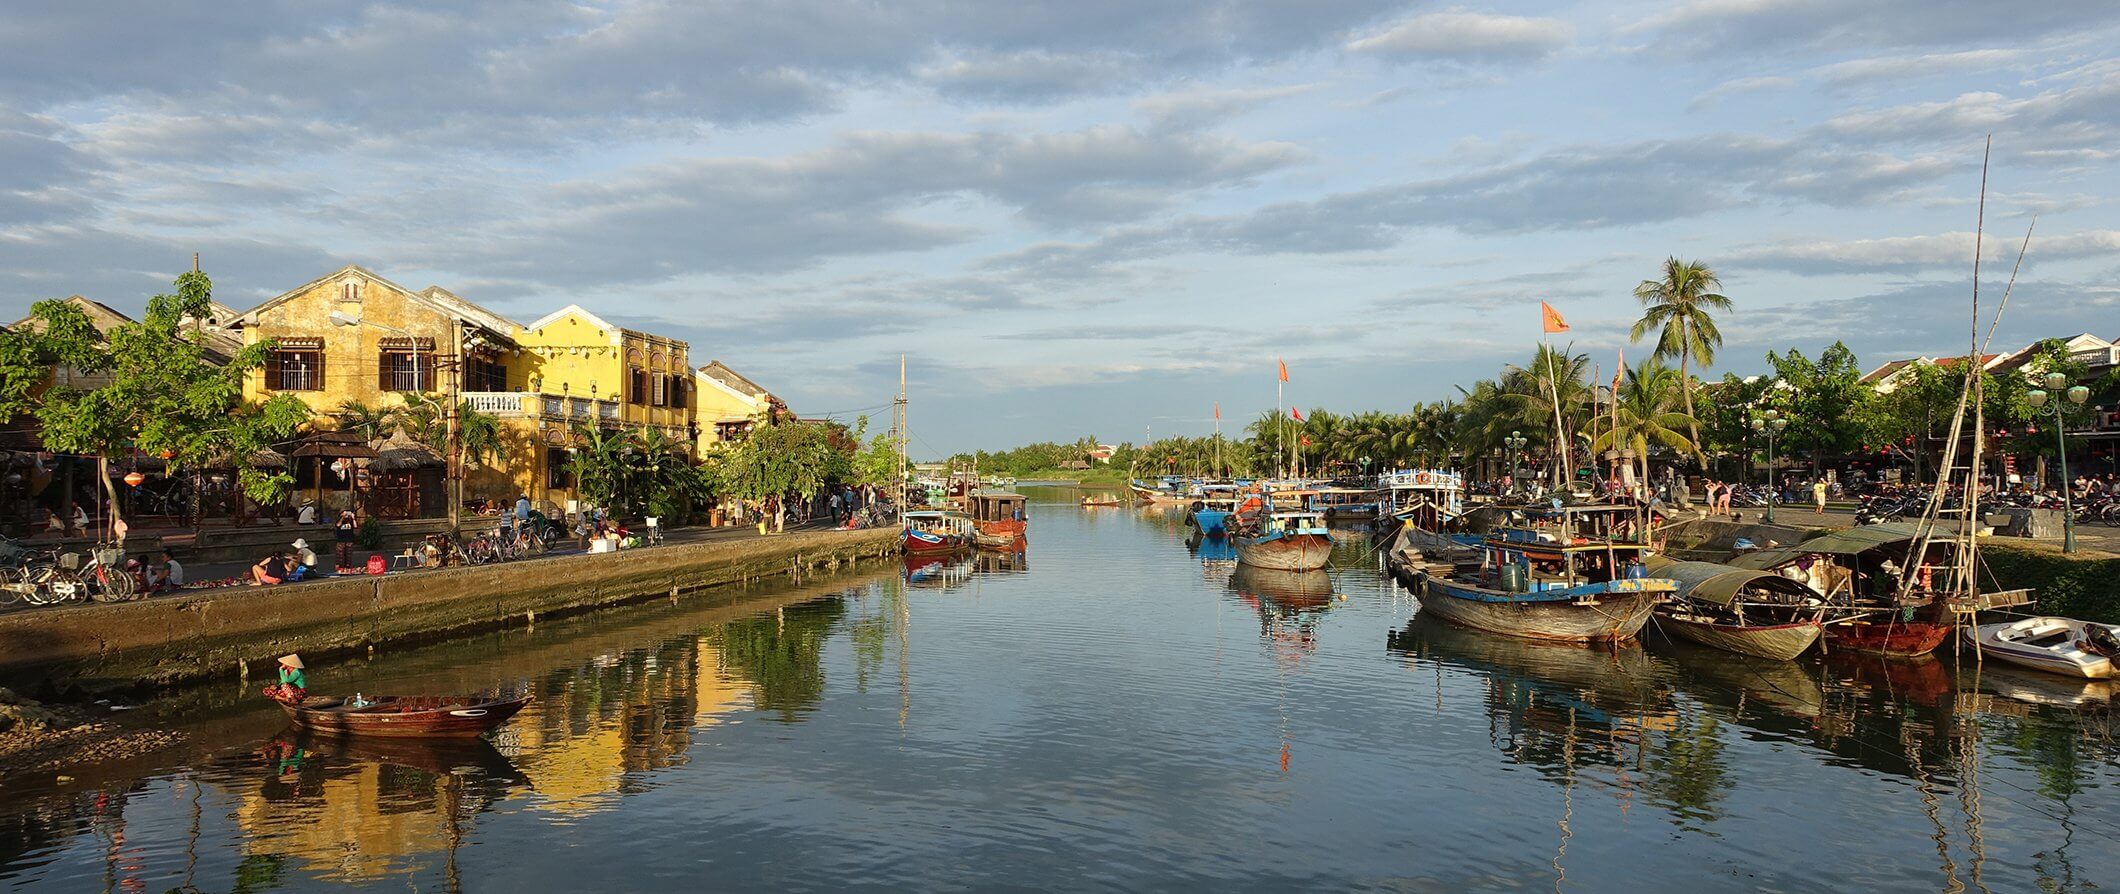 Hoi An river with fishing boats to the right and houses to the left